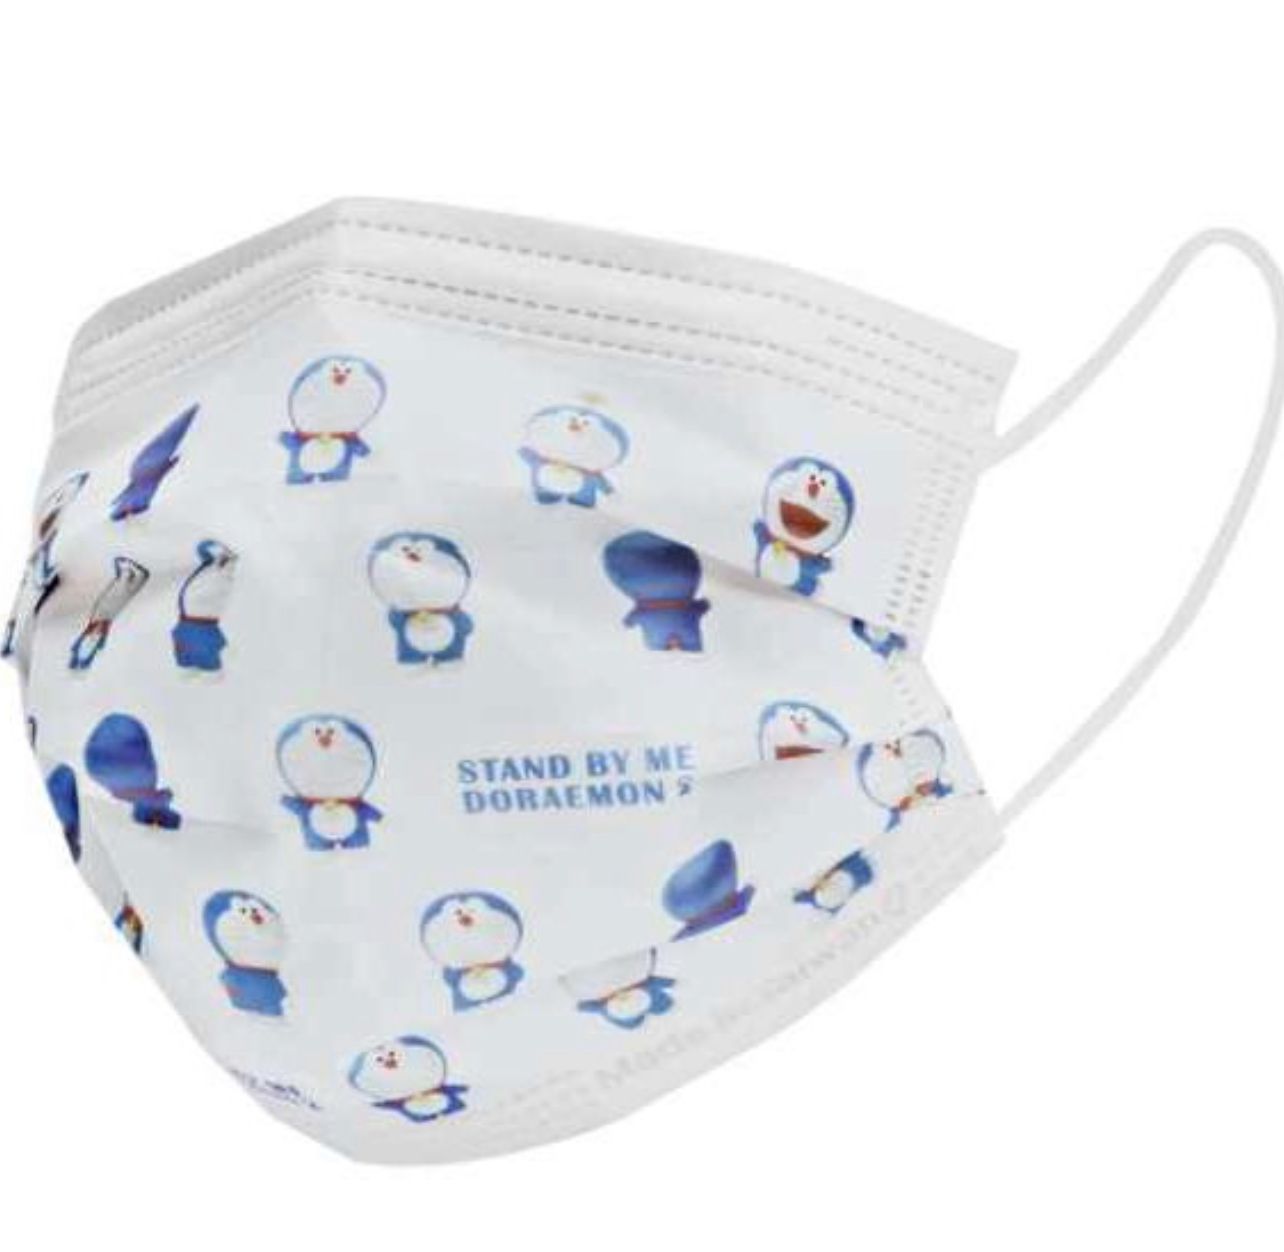 Limited Edition Doraemon Stand by Me 2  Disposable Child Face Mask by Shang Hao